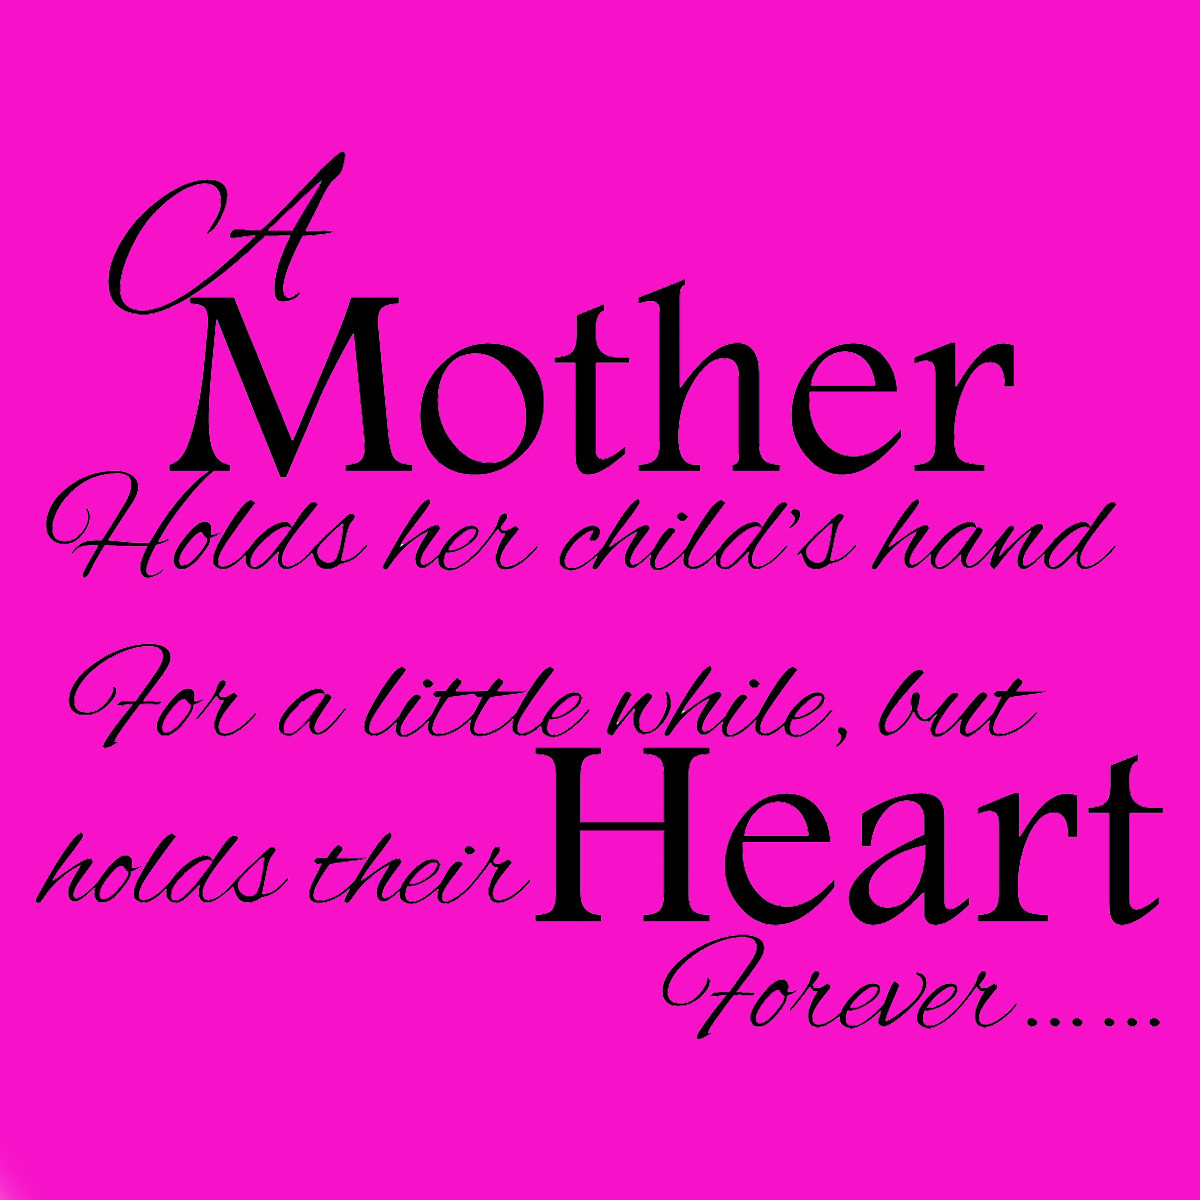 Quotes Motherhood
 Mothers Day Quotes For QuotesGram